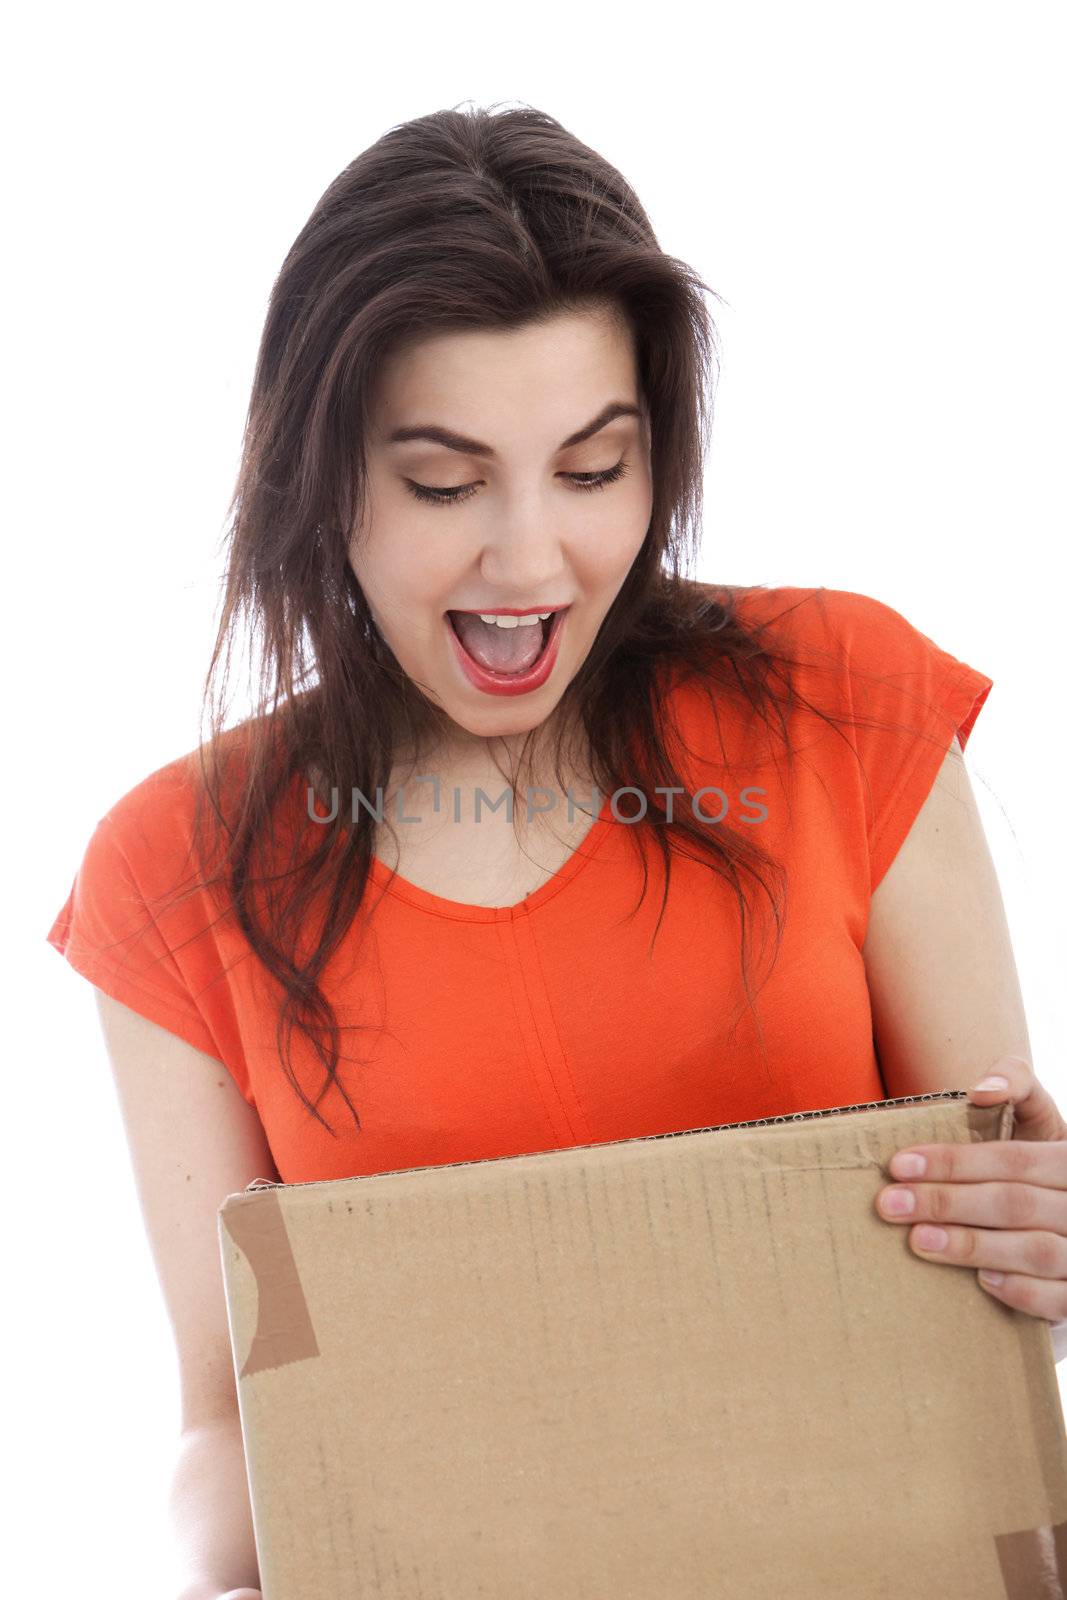 Surprised young woman holding a cardboard box by Farina6000